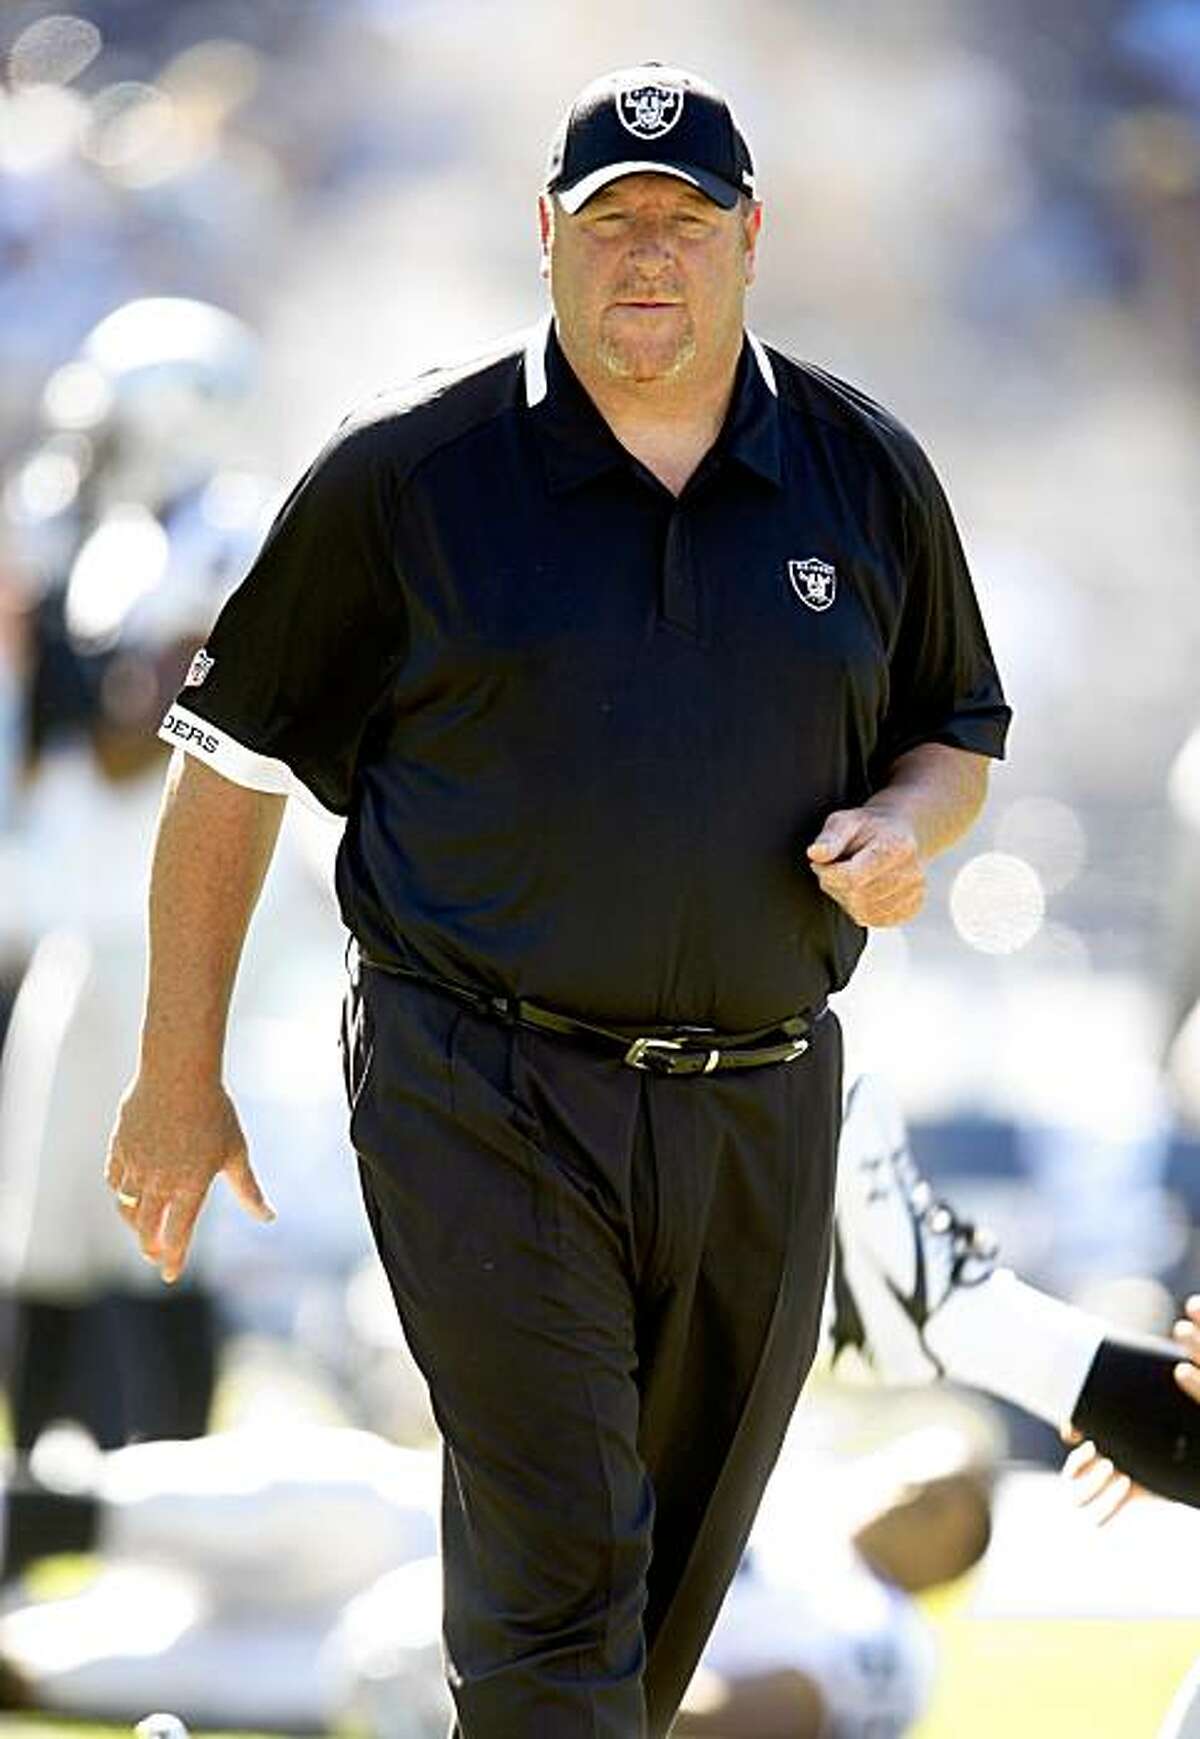 Oakland Raiders coach Tom Cable walks amongst his players during warm-ups prior to an NFL football game against the San Diego Chargers, Sunday, Nov. 1, 2009, in San Diego. (AP Photo/Chris Park)